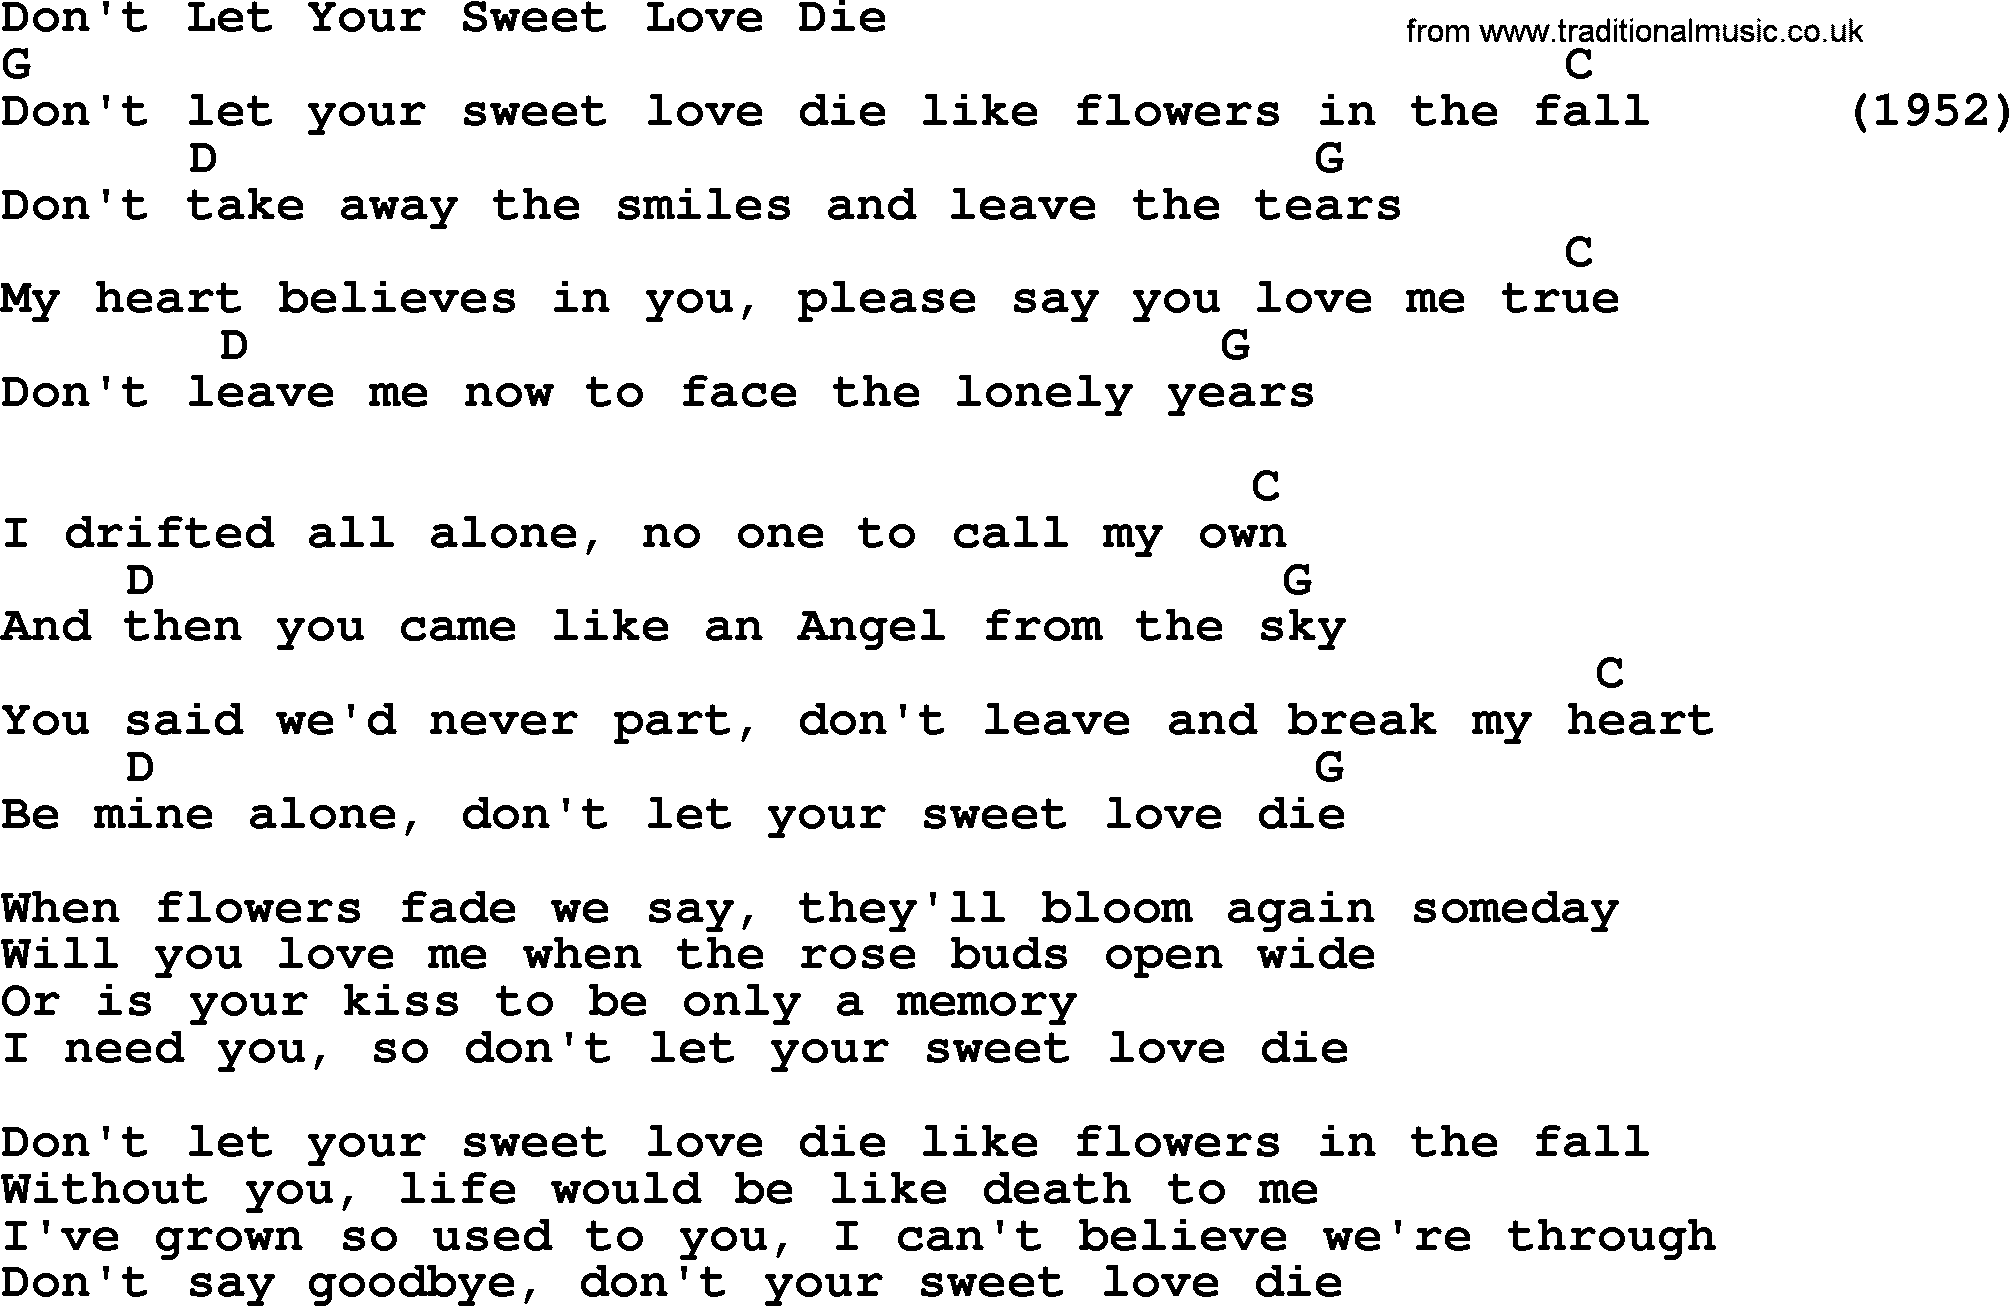 Bluegrass song: Don't Let Your Sweet Love Die, lyrics and chords